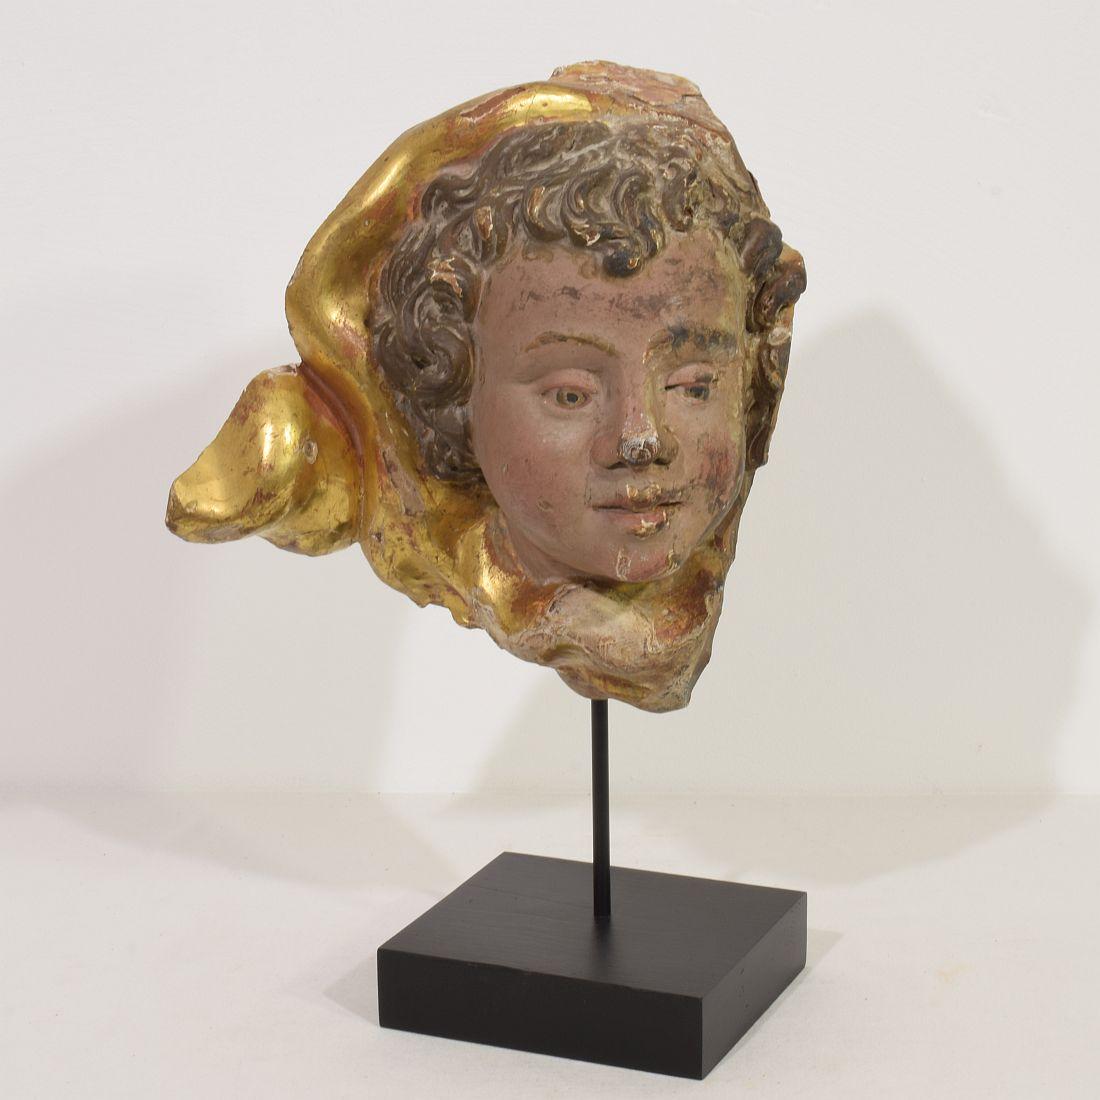 Beautiful handcarved angelhead fragment
Italy, circa 1650-1750
Weathered small losses and old repairs. 
Measurement here below inclusive the wooden base.